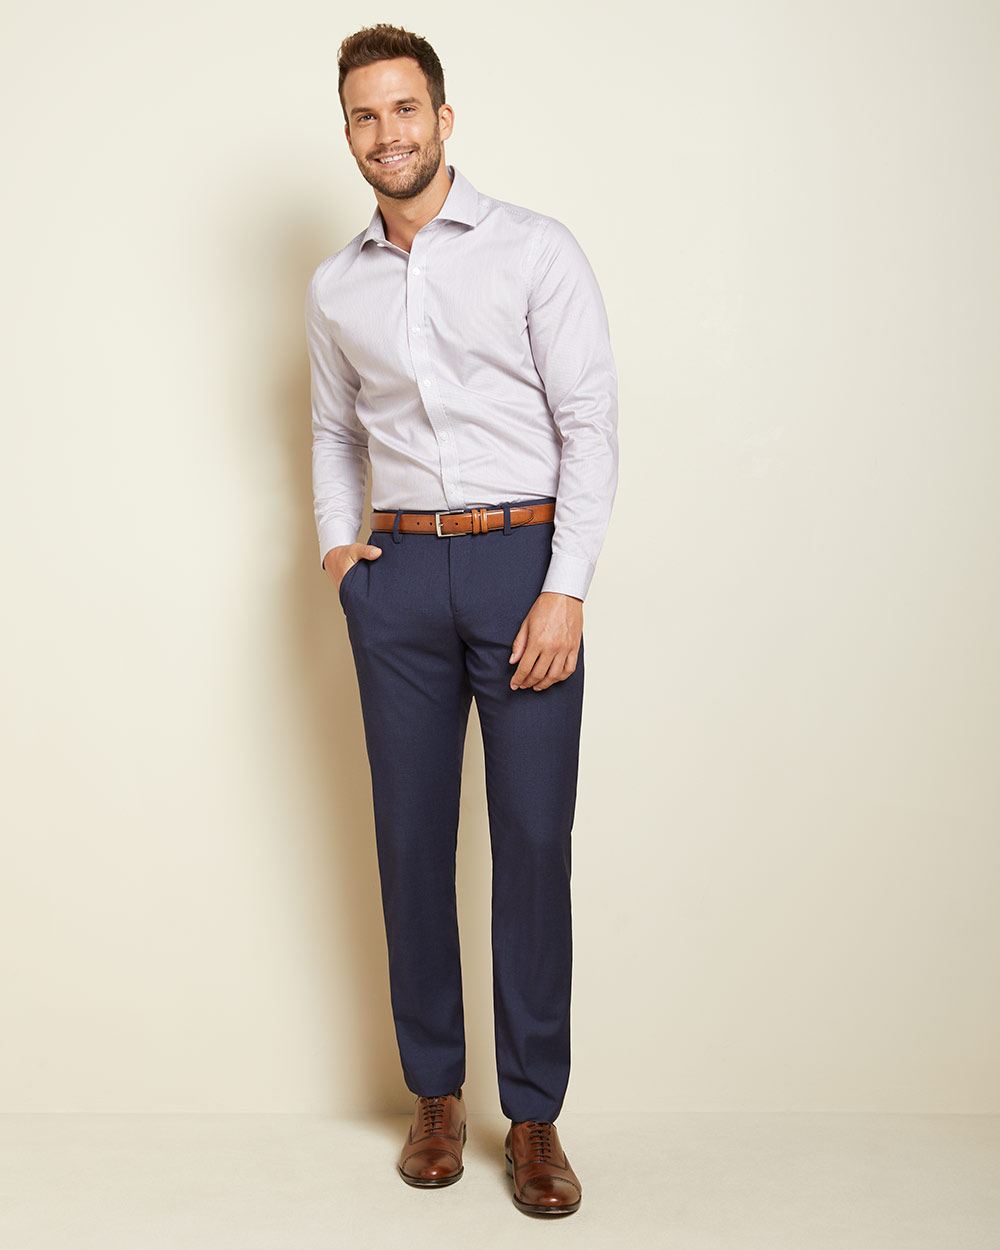 Tailored fit dark blue City Pant - 30'' | RW&CO.